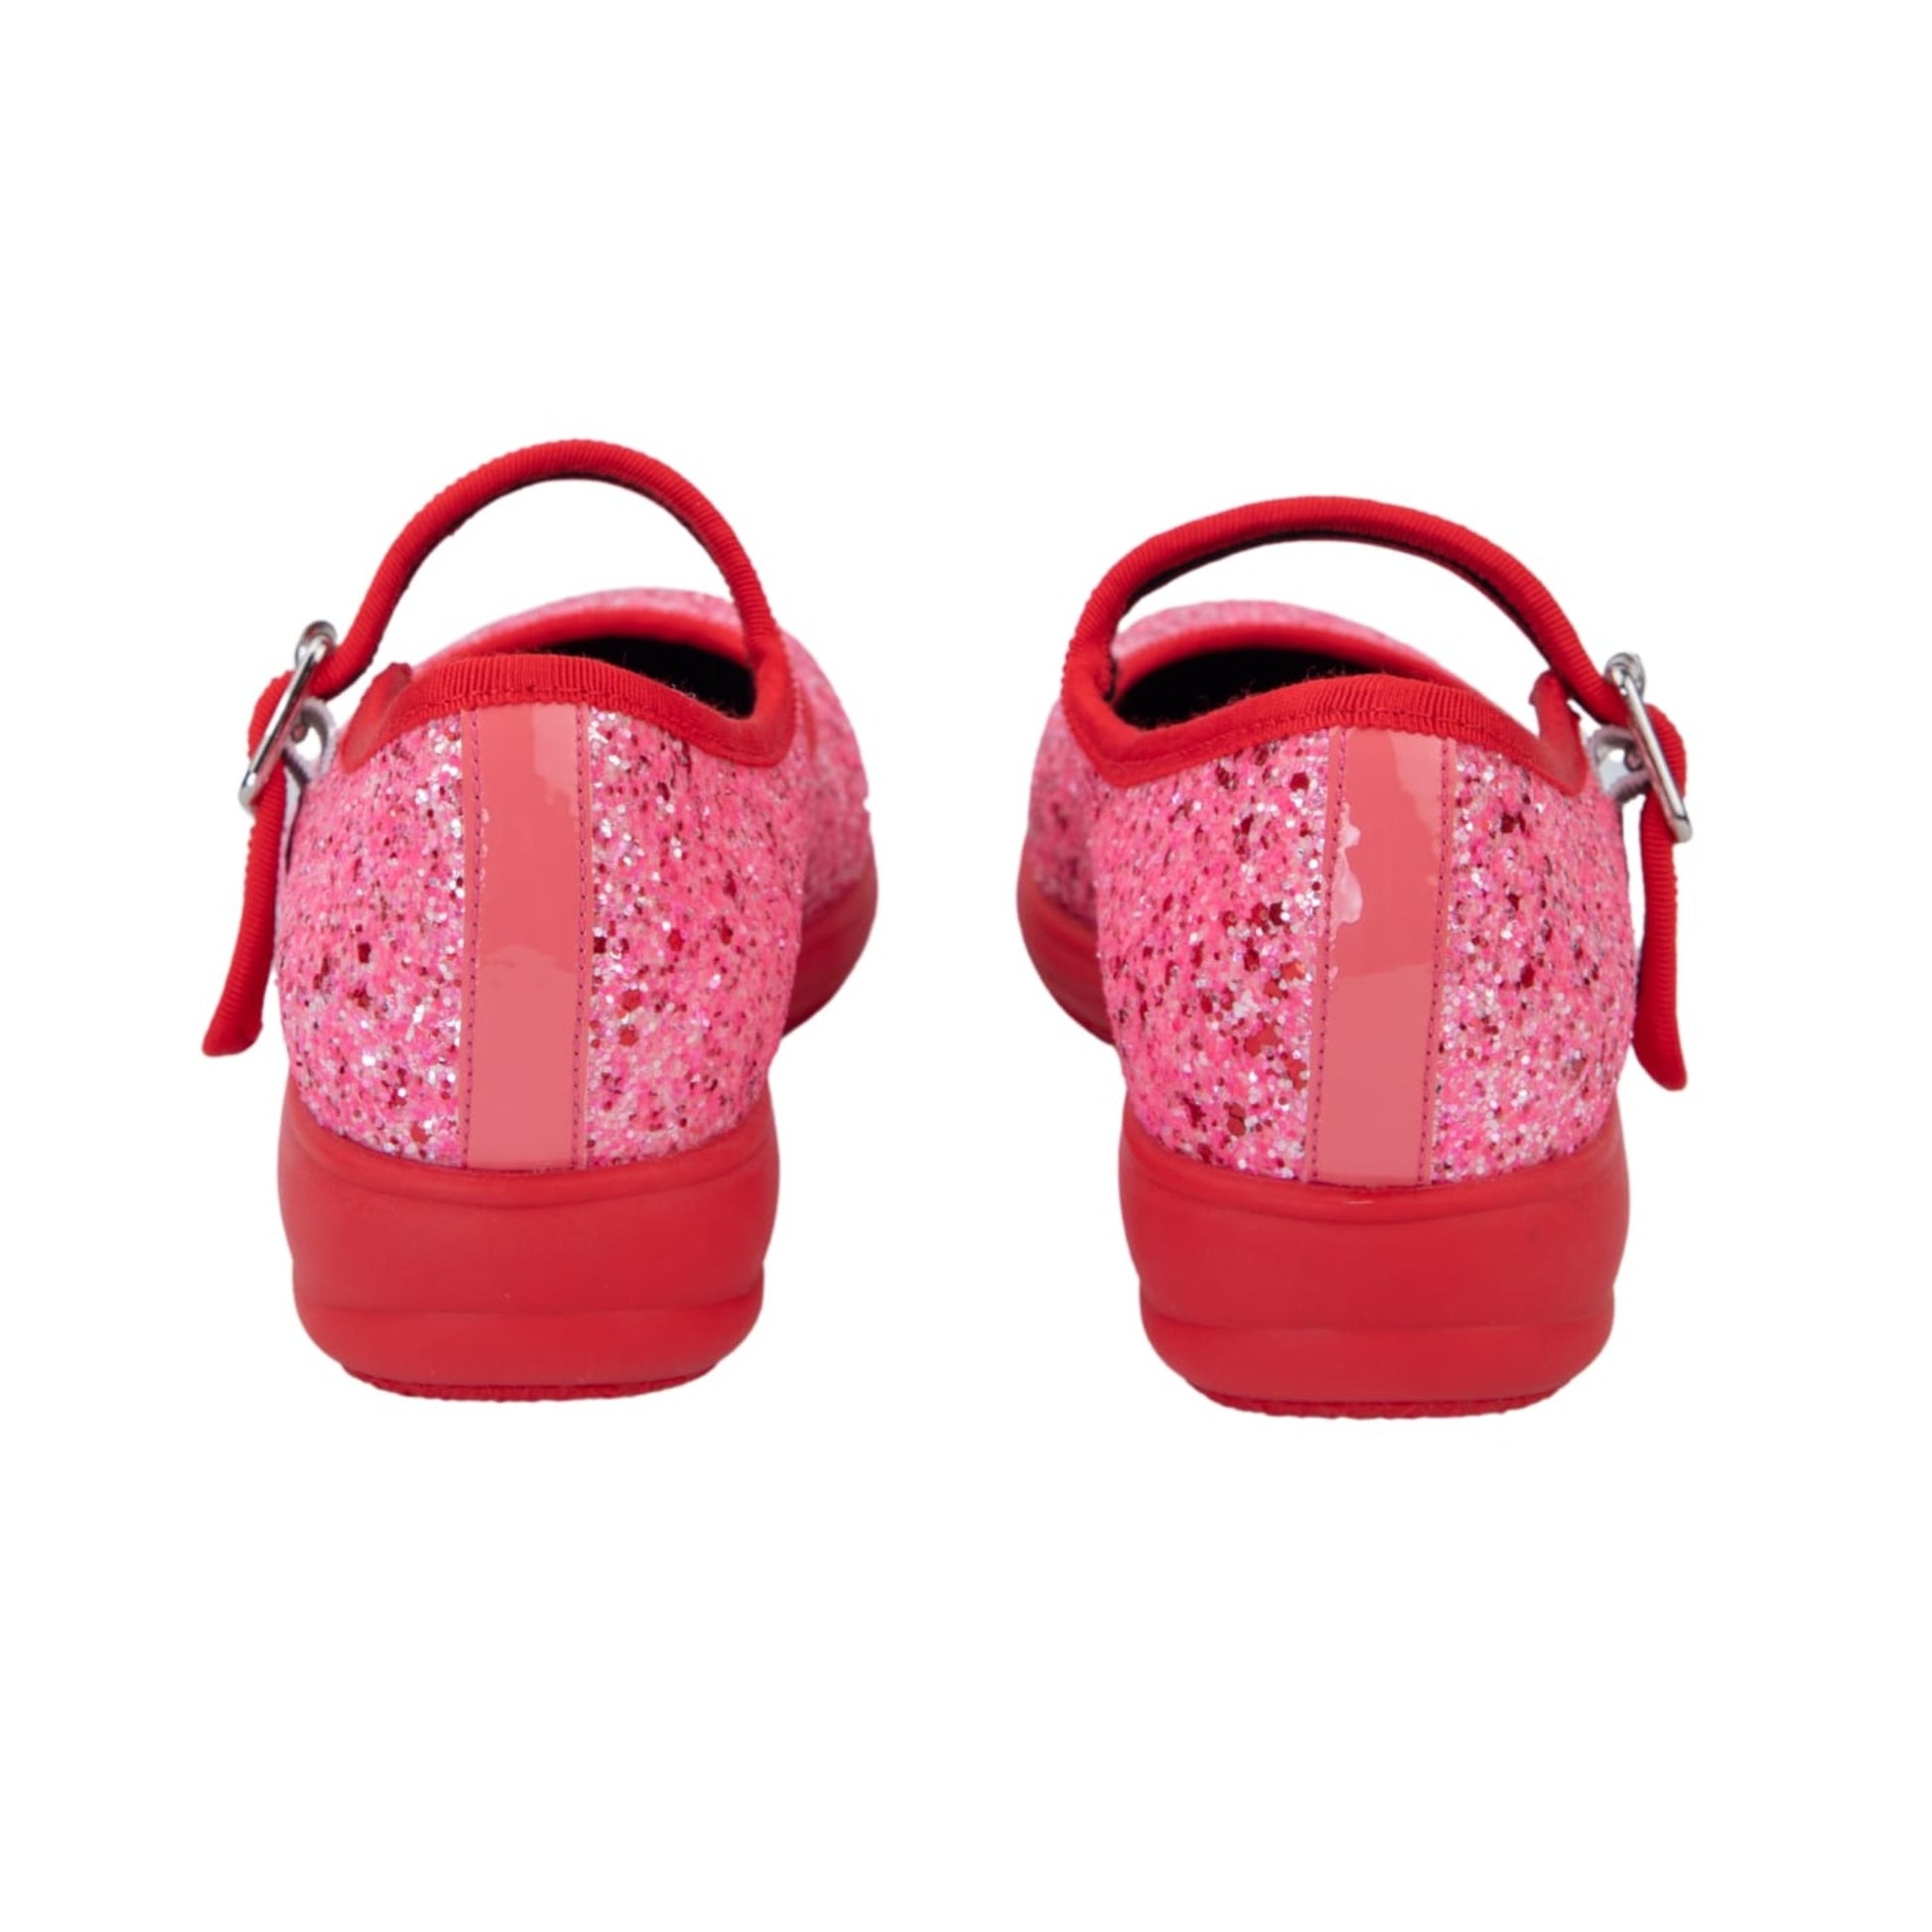 Sherbet Mary Janes by RainbowsAndFairies.com.au (Pink Glitter - Red Glitter - Mismatched Shoes - Glitter Shoes - Sparkle) - SKU: FW_MARYJ_GLITR_SHE - Pic-05